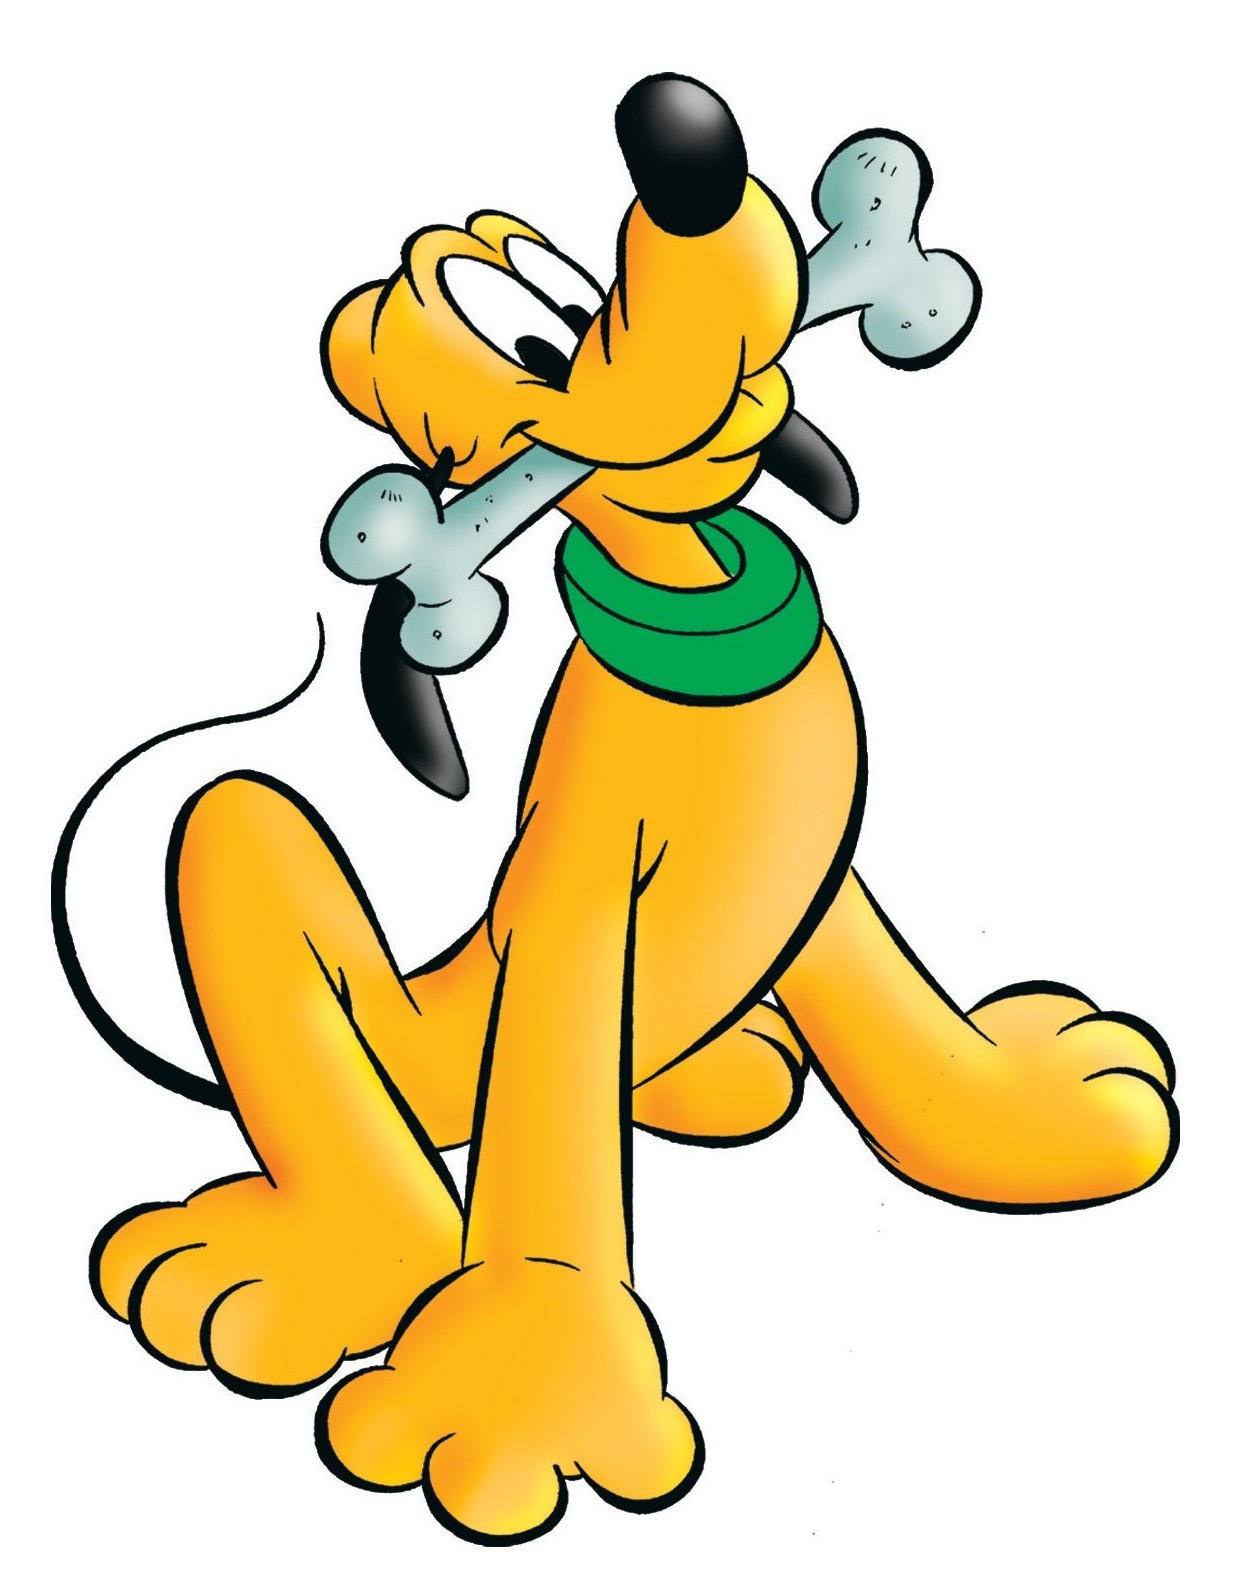 Pluto The Dog With Bone - ClipArt Best